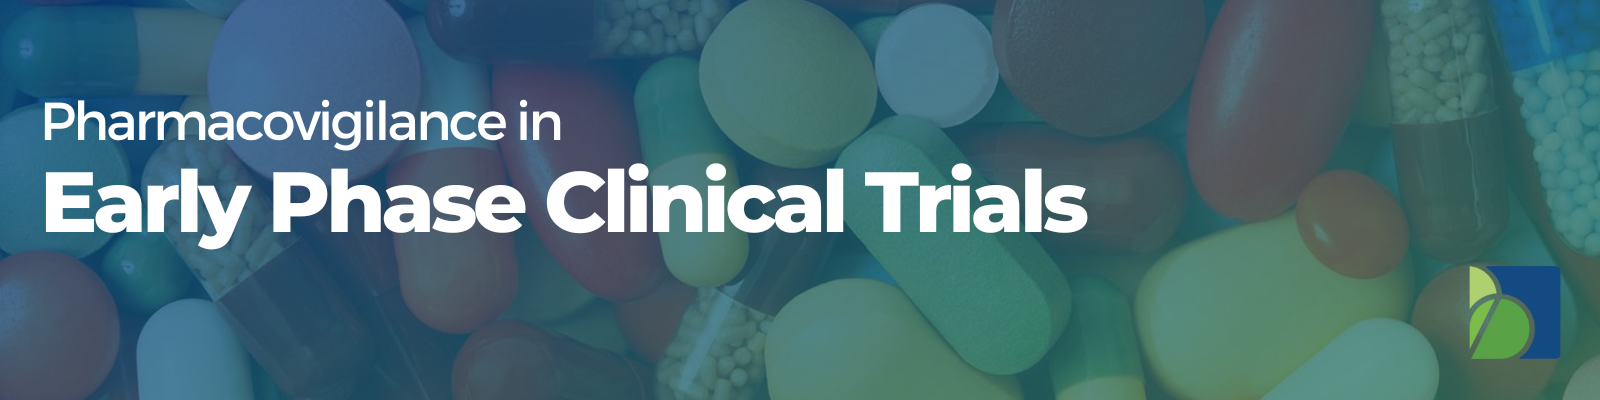 pharmacovigilance in early phase clinical trials